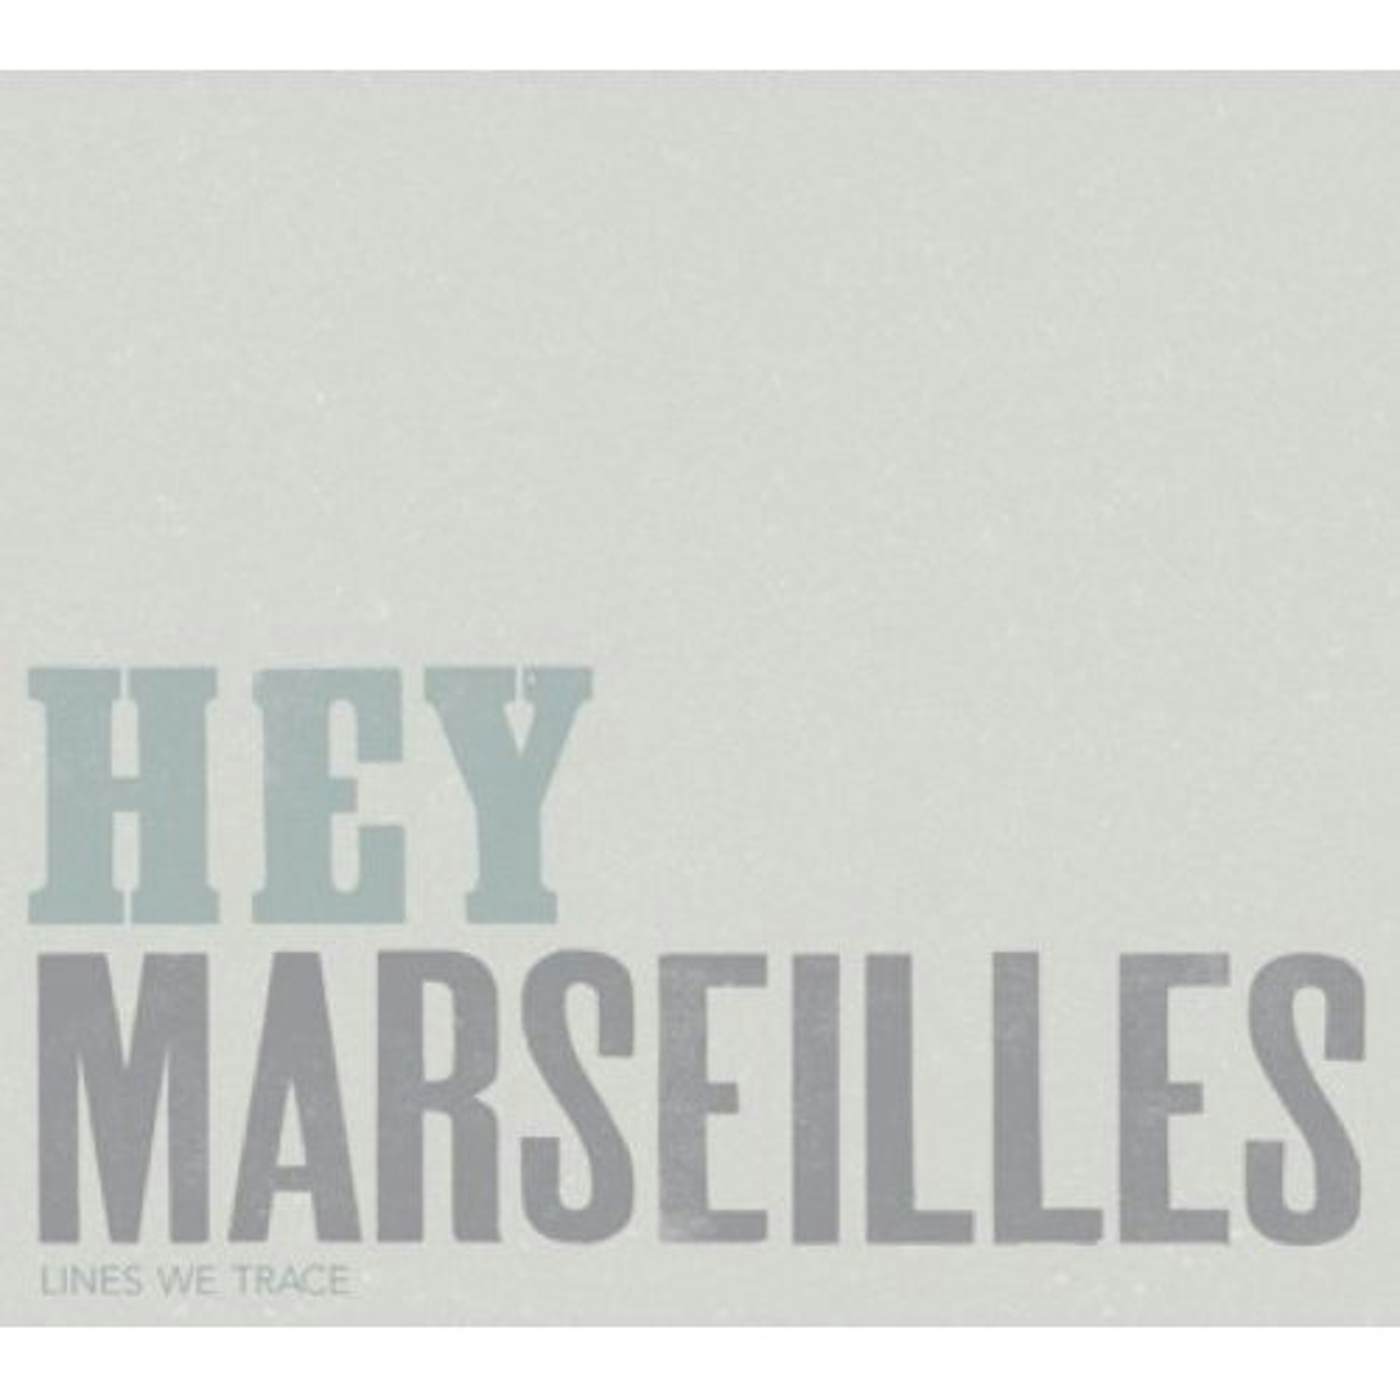 Hey Marseilles LINES WE TRACE CD